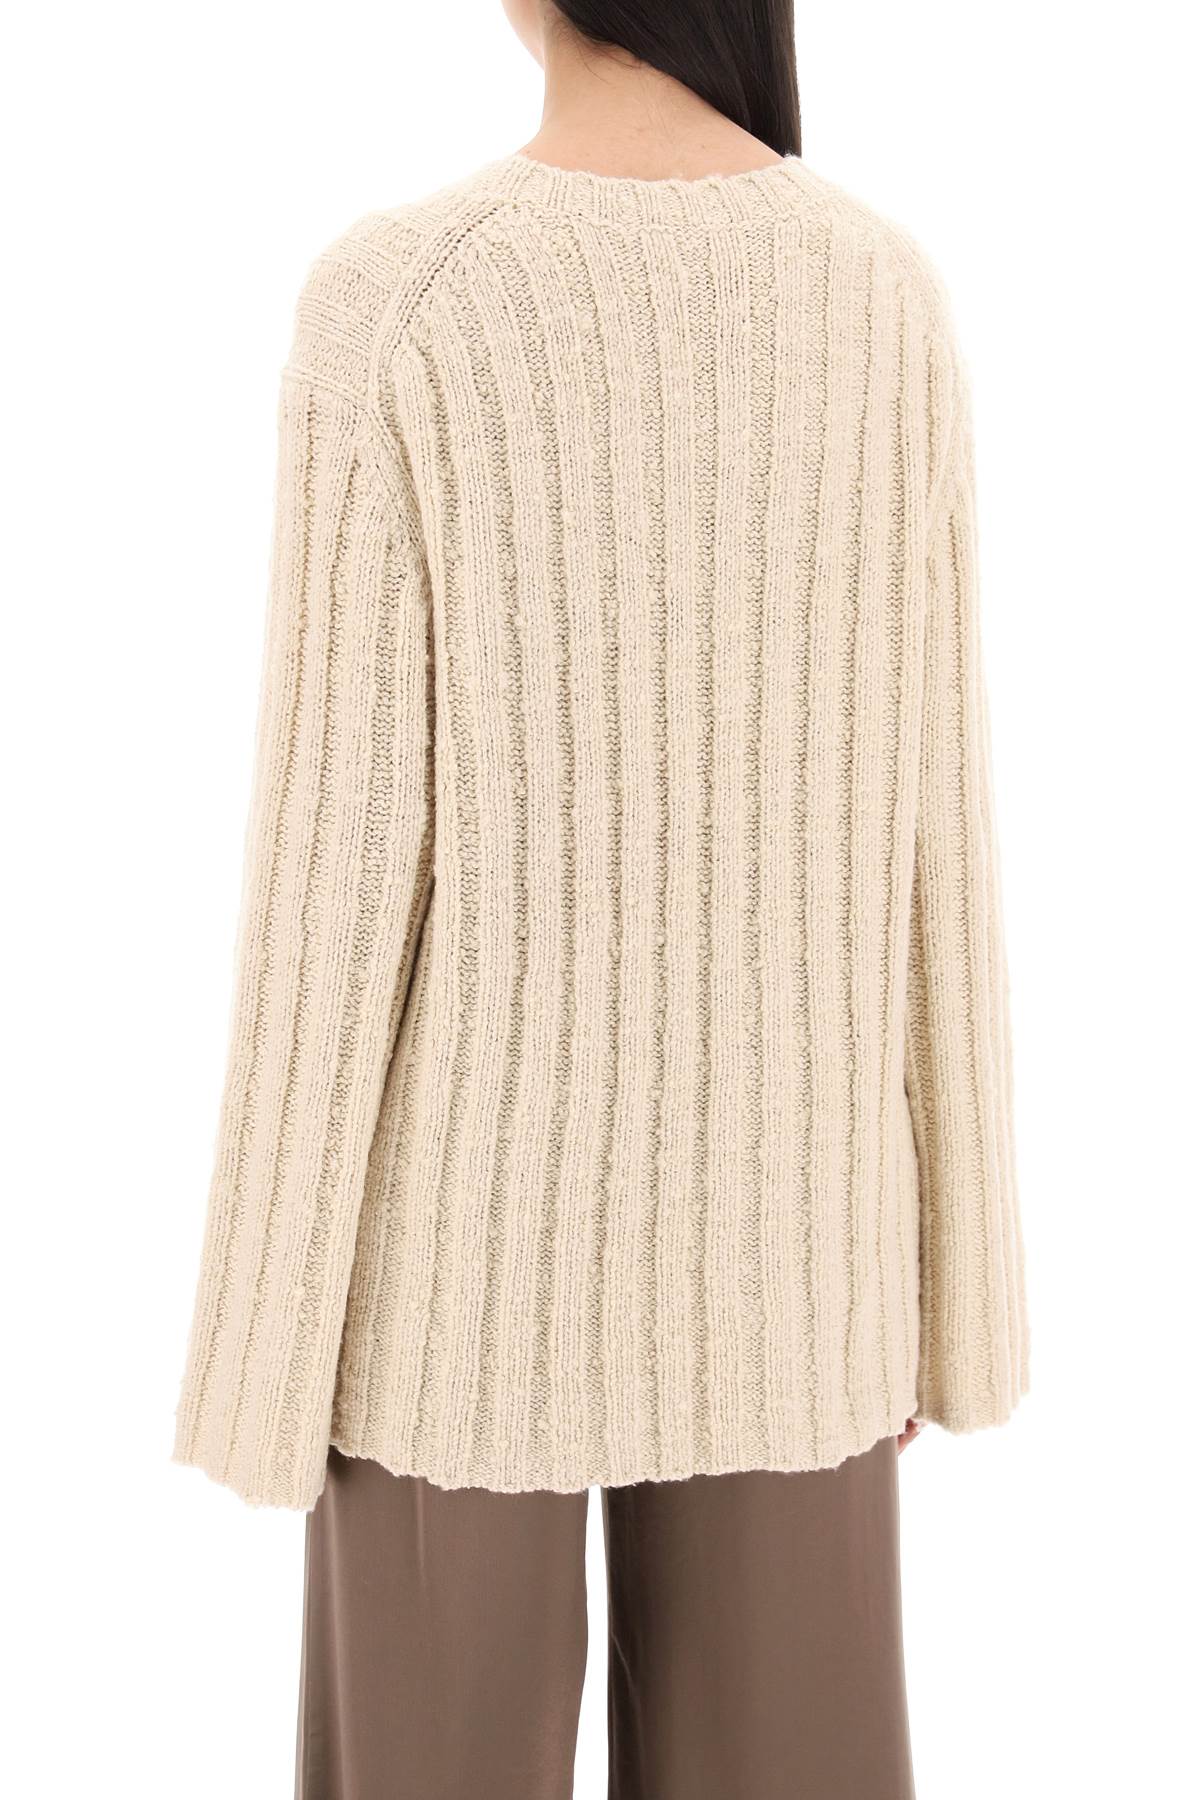 By Malene Birger Replace With Double Quotecirra Ribbed Knit Pul   Beige